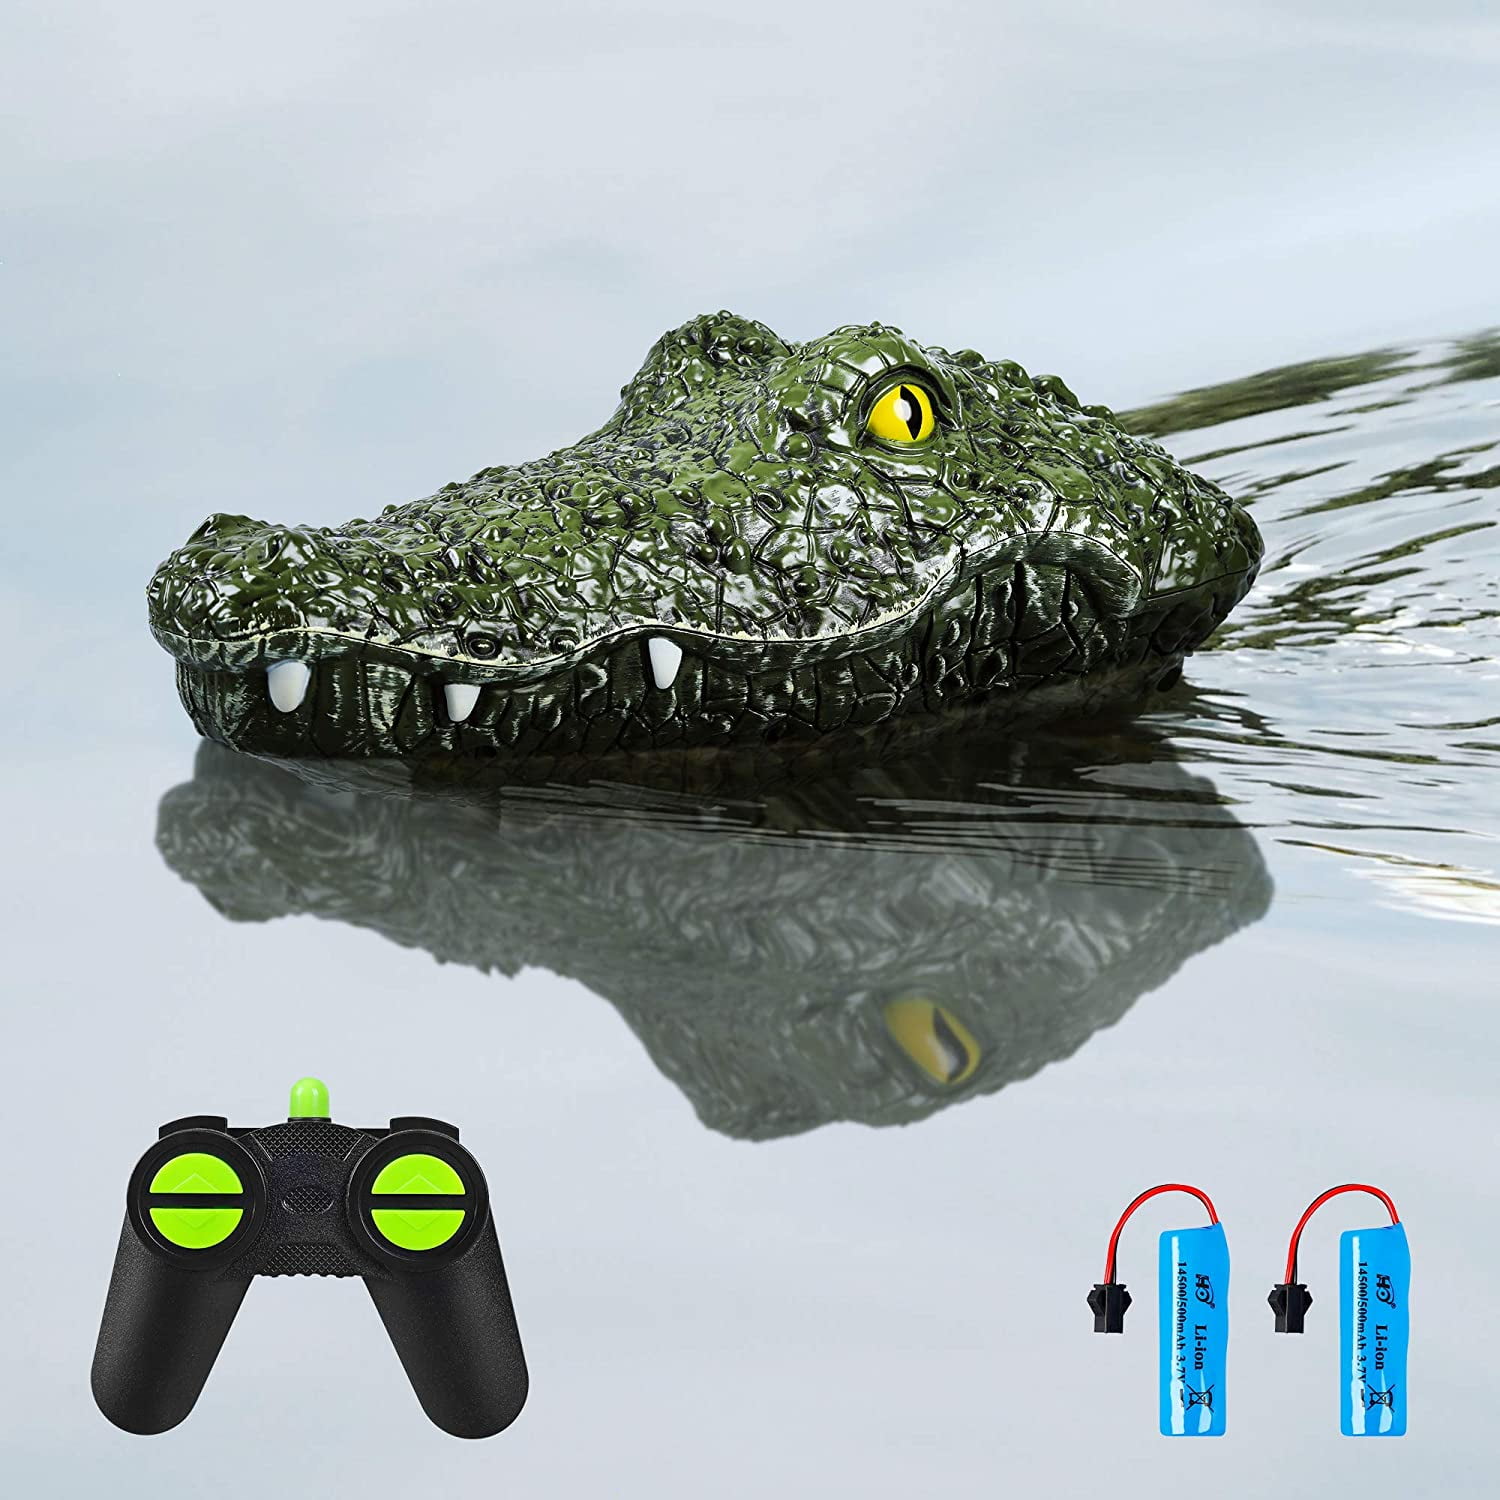 Animal Toys Party Gifts for Pool 2.4G Electric Remote Control Boat with Simulation Crocodile Head Spoof Toy Crocodile Head Floating RC Boat Green Pond Patio Home Decoration Garden